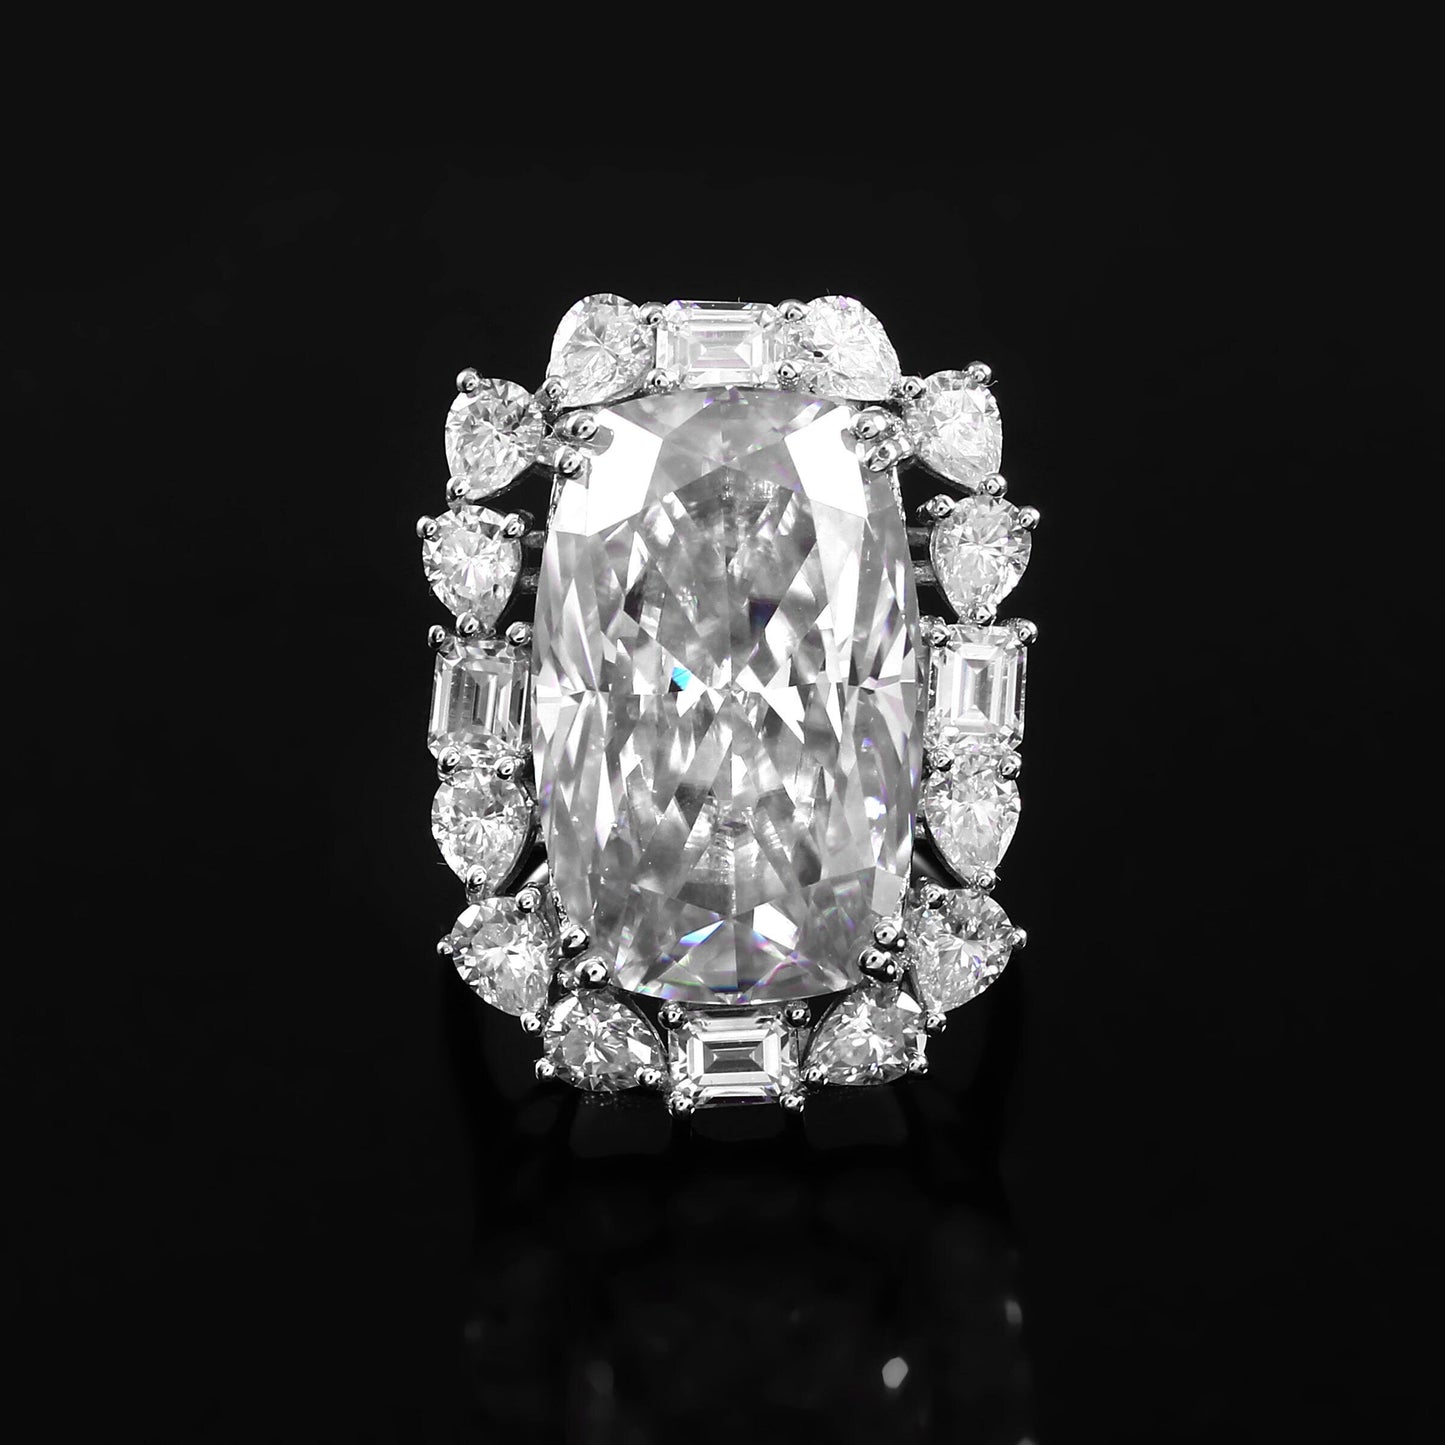 Elongated Cushion Moissanite Solid Gold Ring - Victorian style grand engagement ring